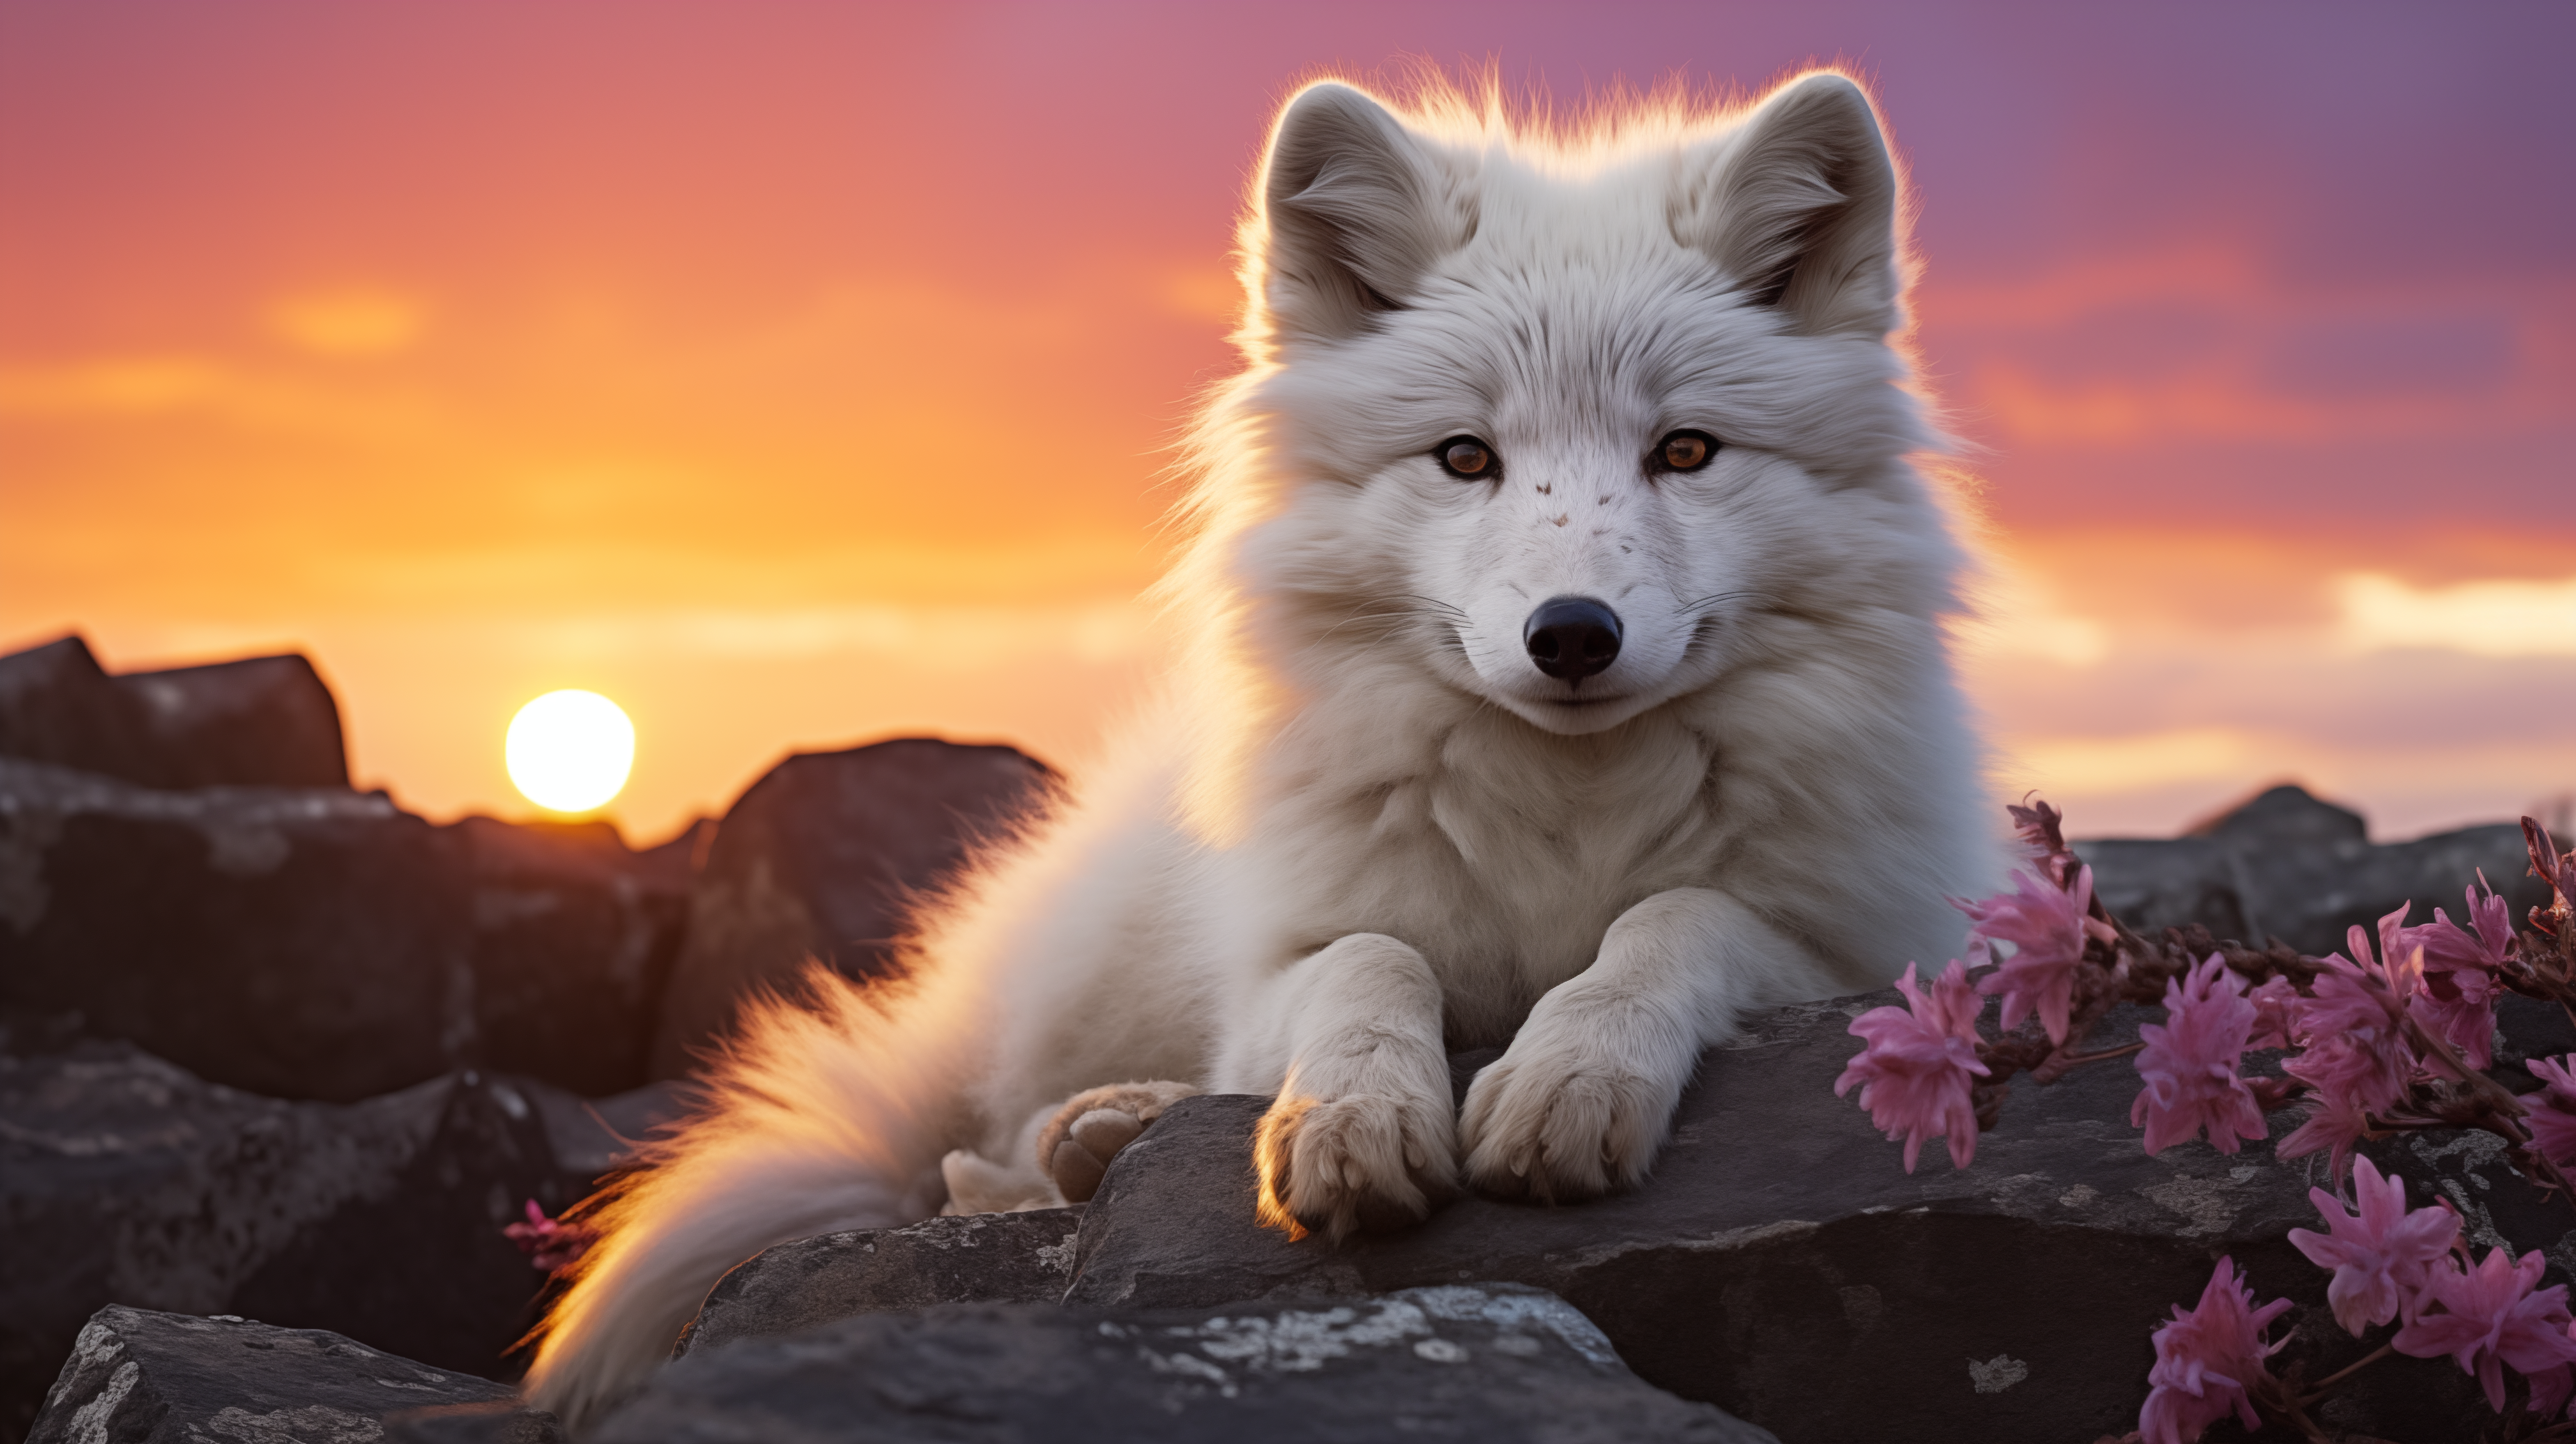 HD wallpaper of a serene Arctic Fox lying on rocky terrain with a vivid sunset in the background, perfect for desktop backgrounds.